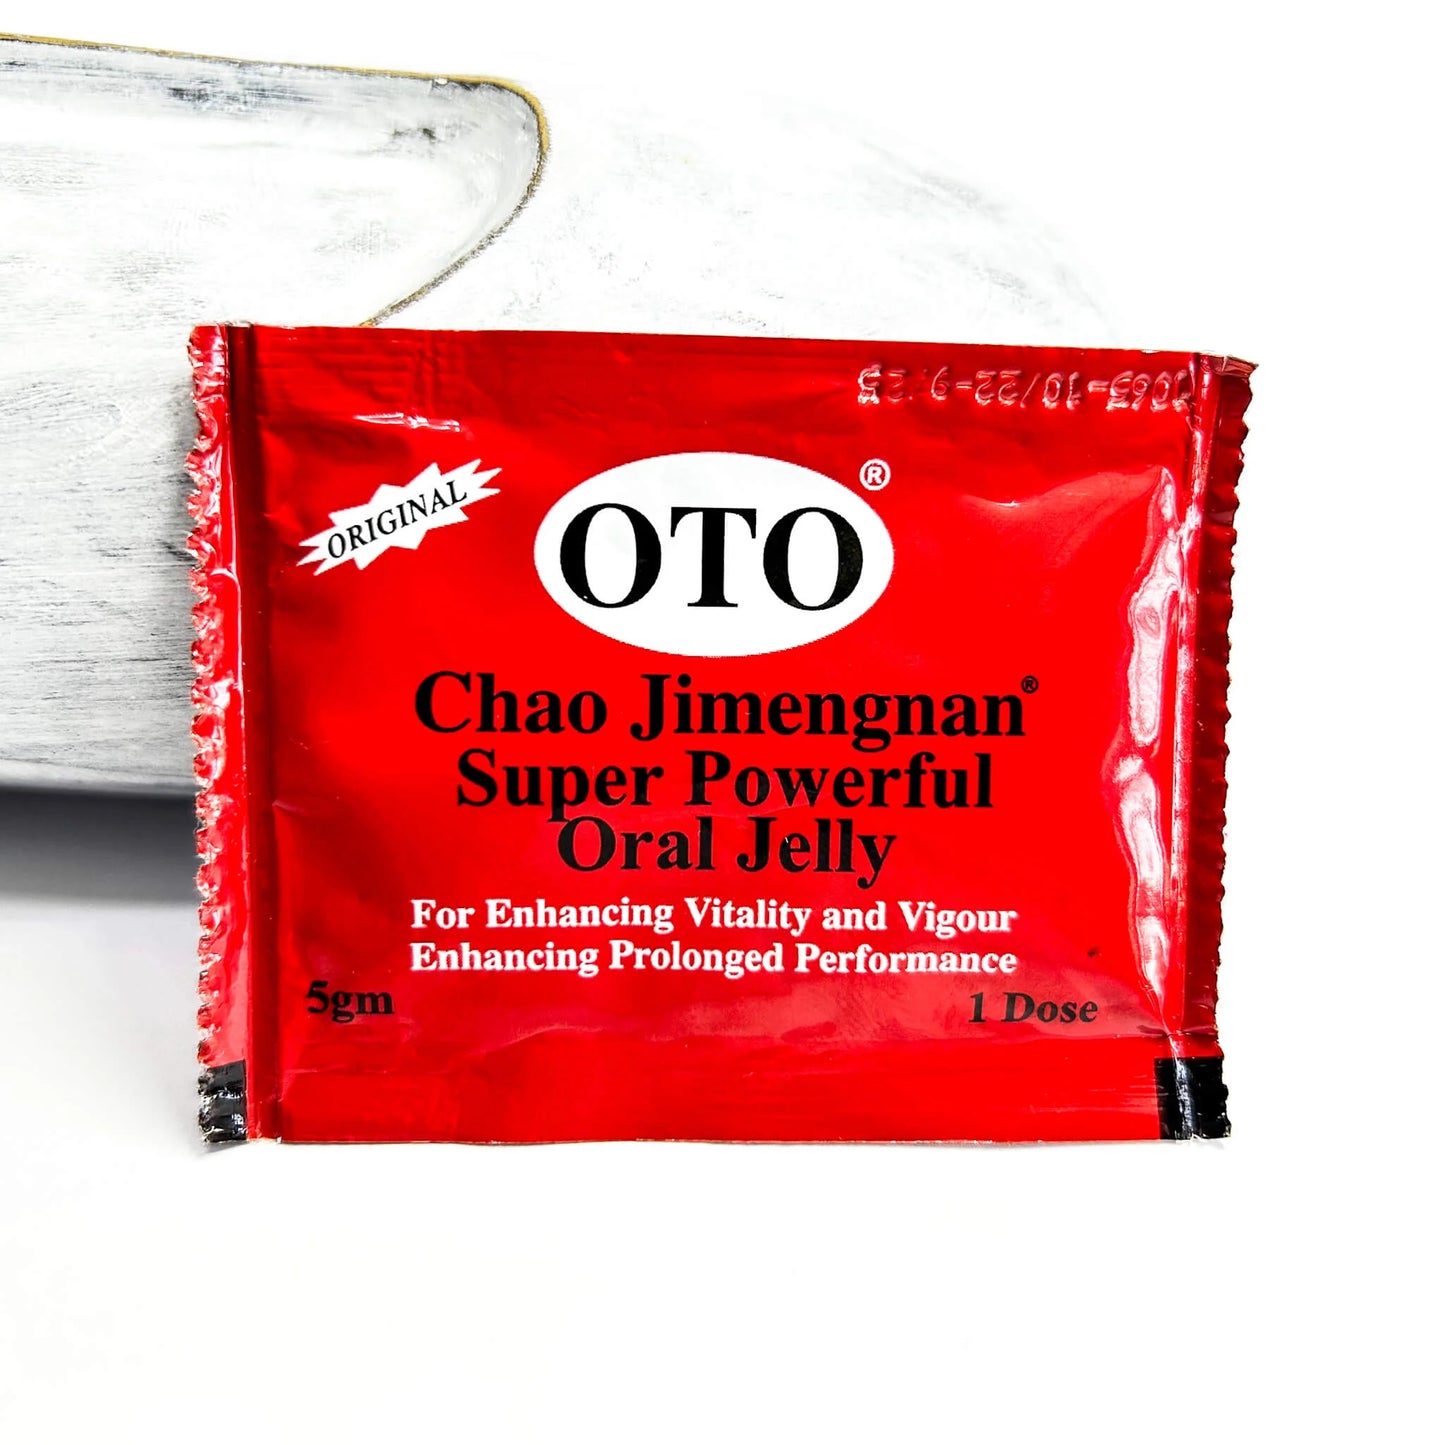 OTO Chao Jimengnan Super Powerful Oral Jelly